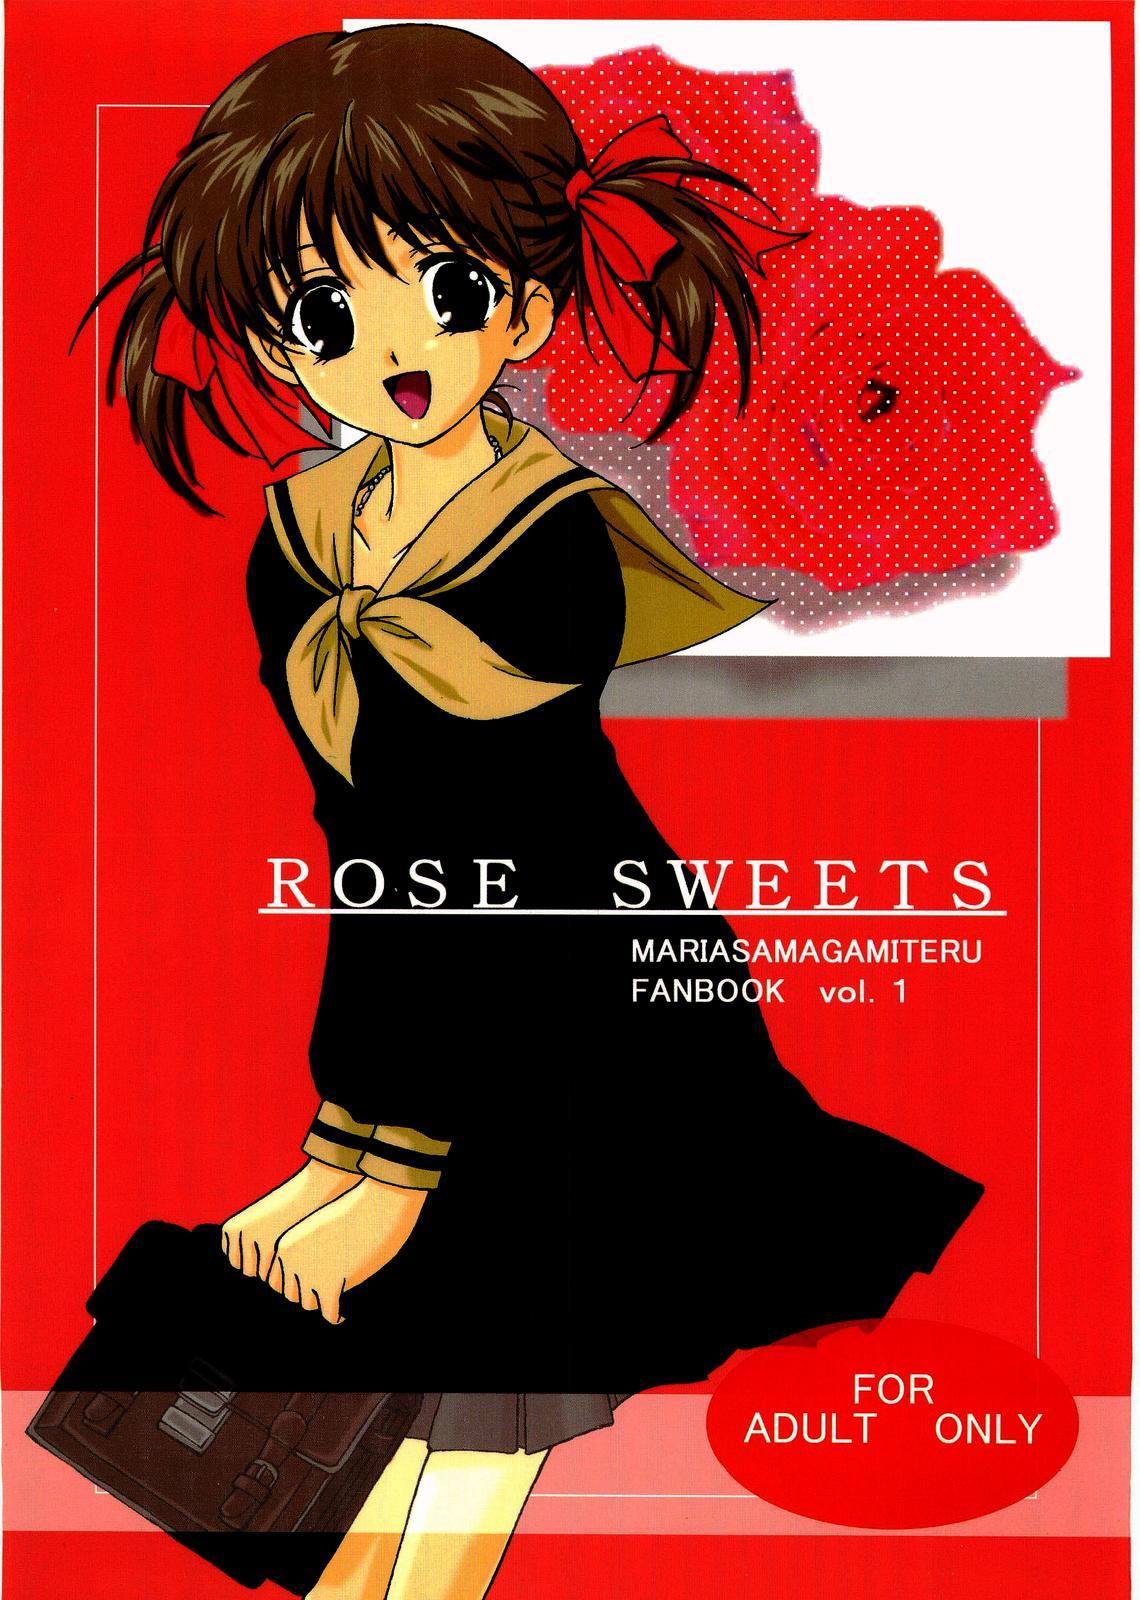 ROSE SWEETS 0